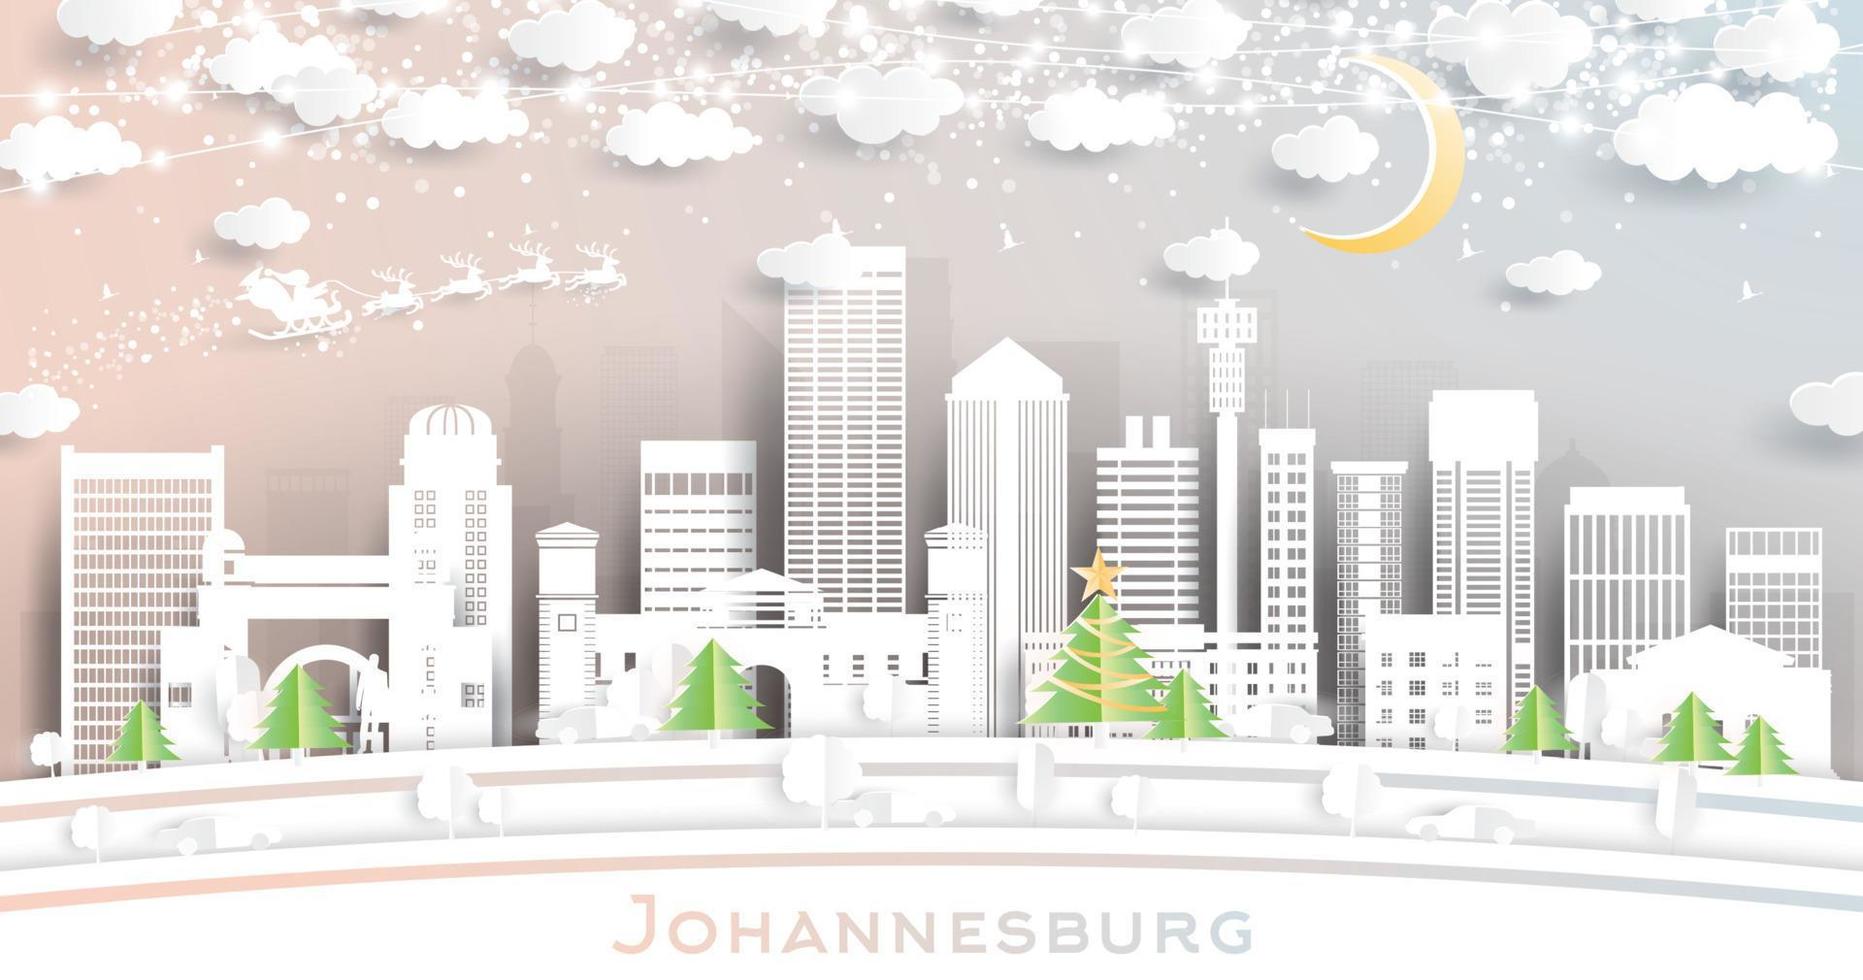 Johannesburg South Africa City Skyline in Paper Cut Style with White Buildings, Moon and Neon Garland. vector